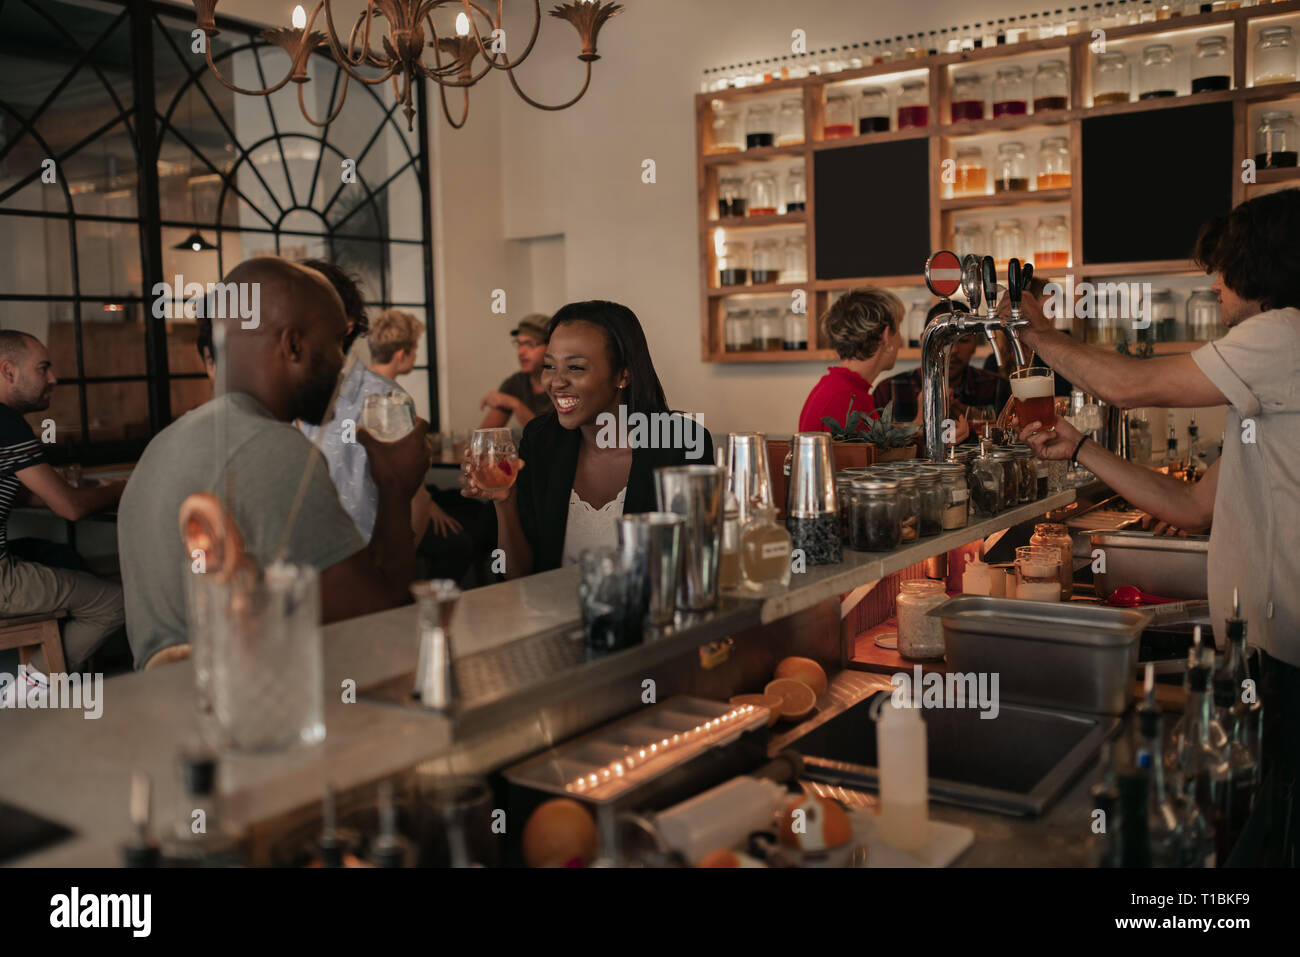 Young African American couple talking over drinks in a bar Stock Photo